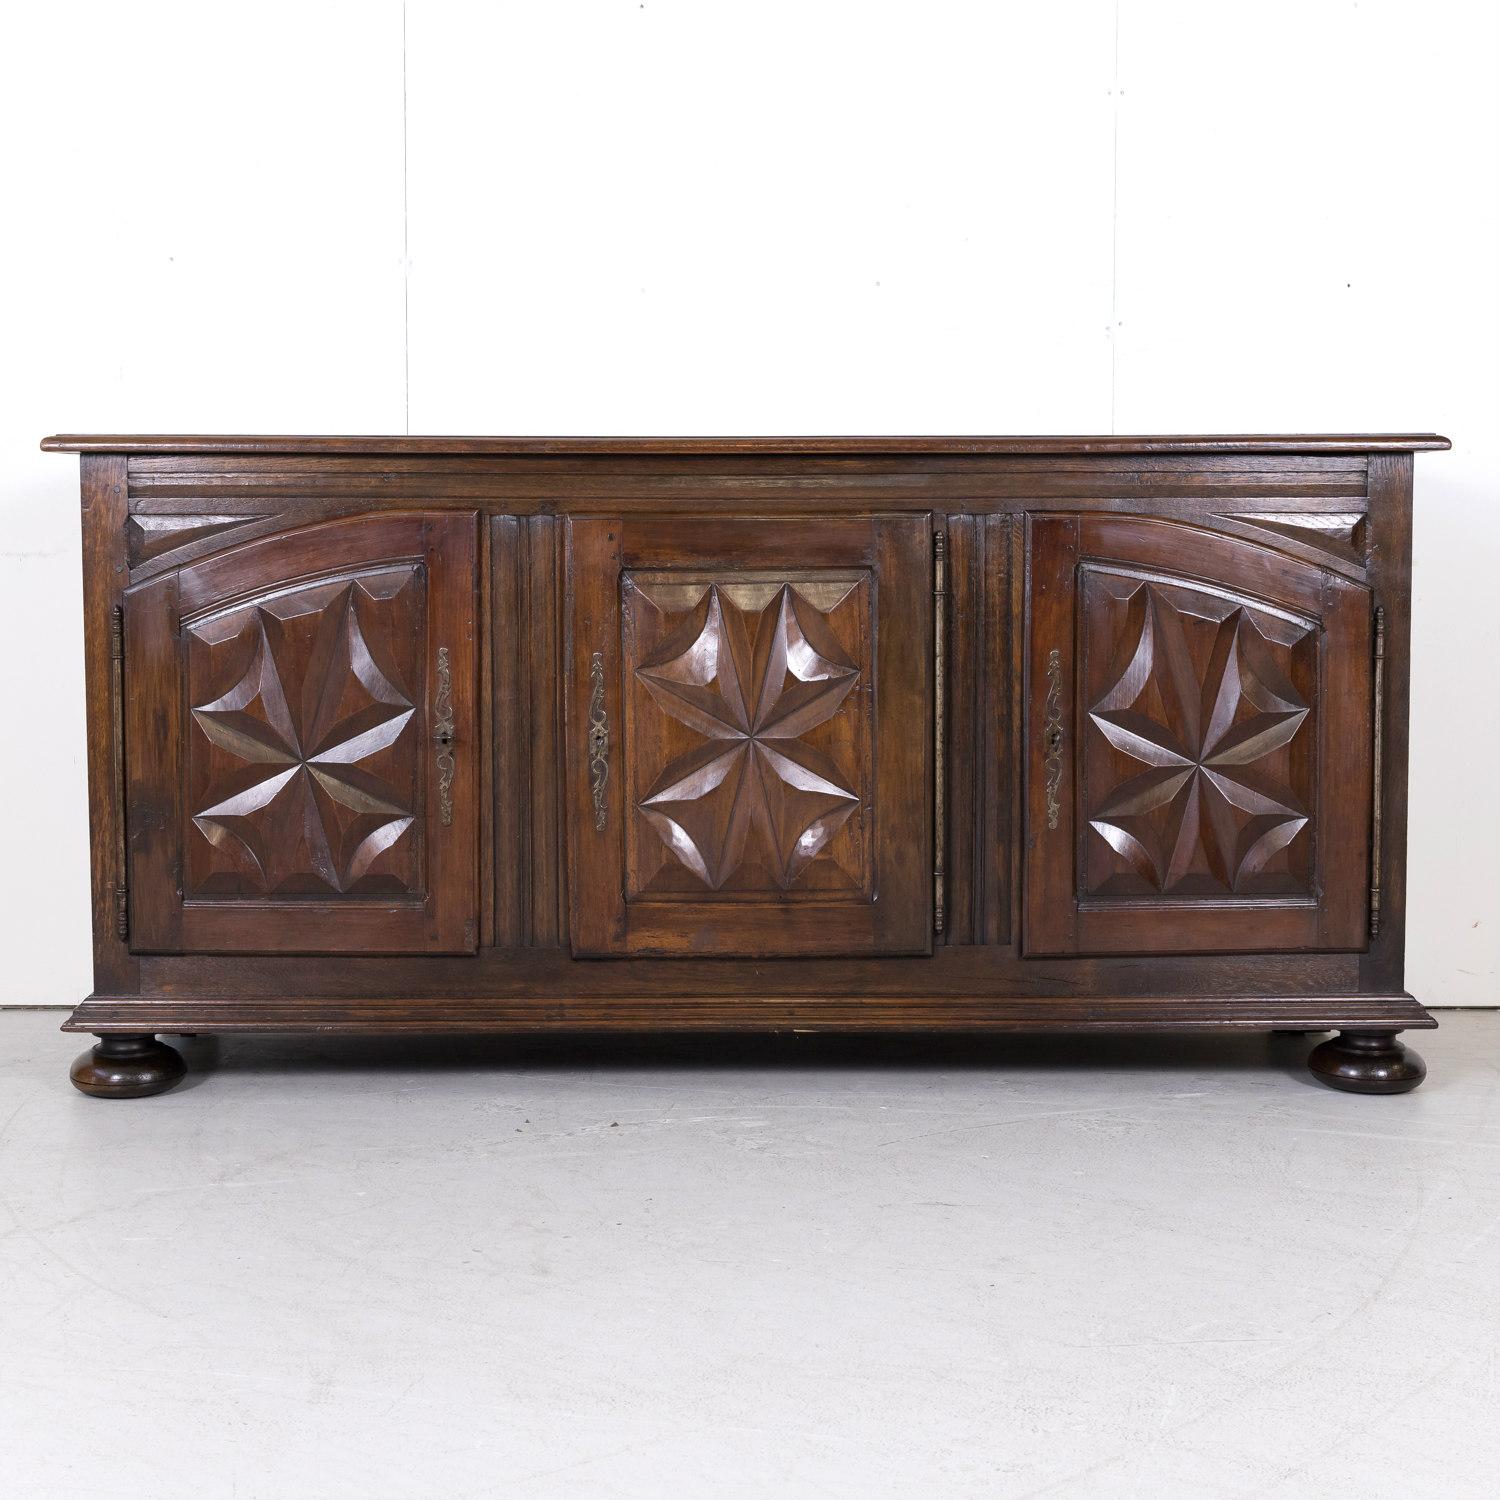 19th century French Louis XIII style enfilade handcrafted by Breton artisans, circa 1890s. A handsome Renaissance style buffet having a solid oak case with a beveled edge rectangular top above three carved walnut doors. All doors feature typical